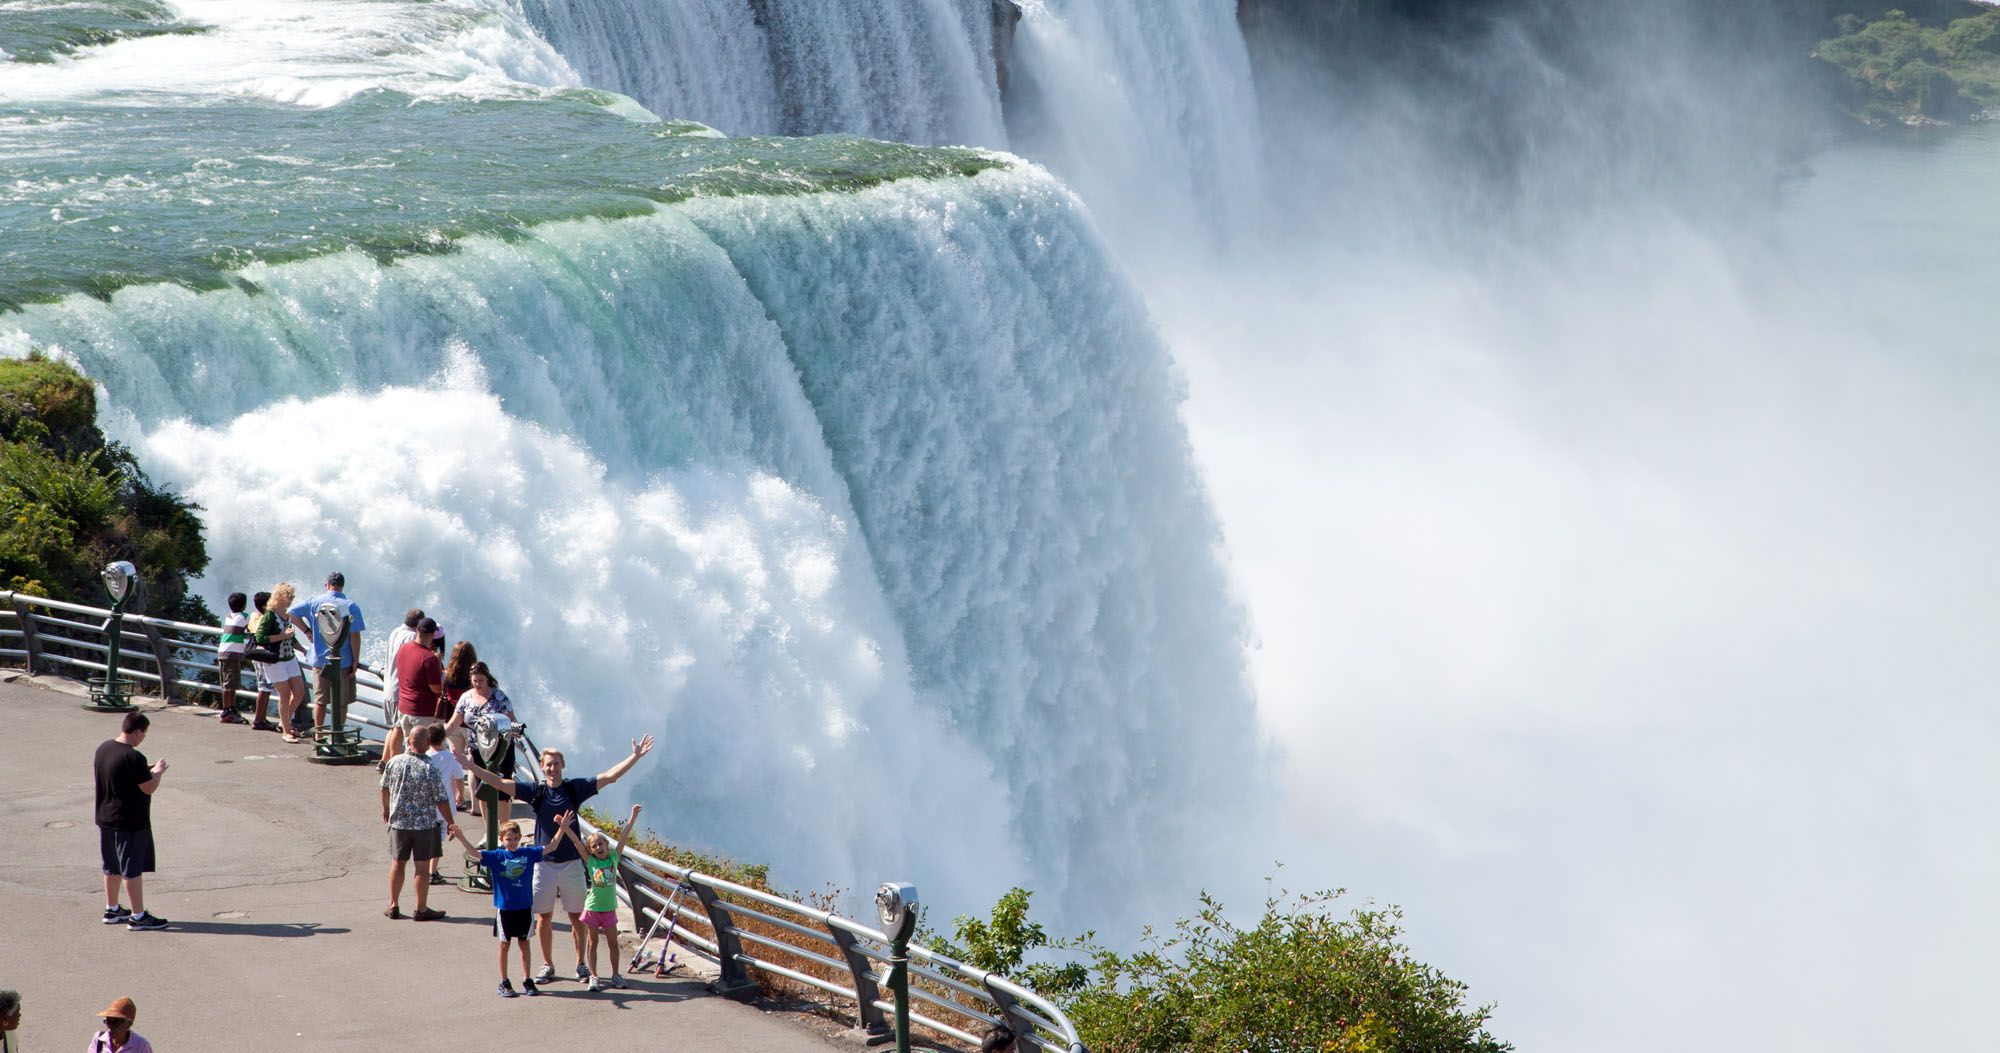 Featured image for “48 Hours in Niagara Falls: The Perfect Itinerary”